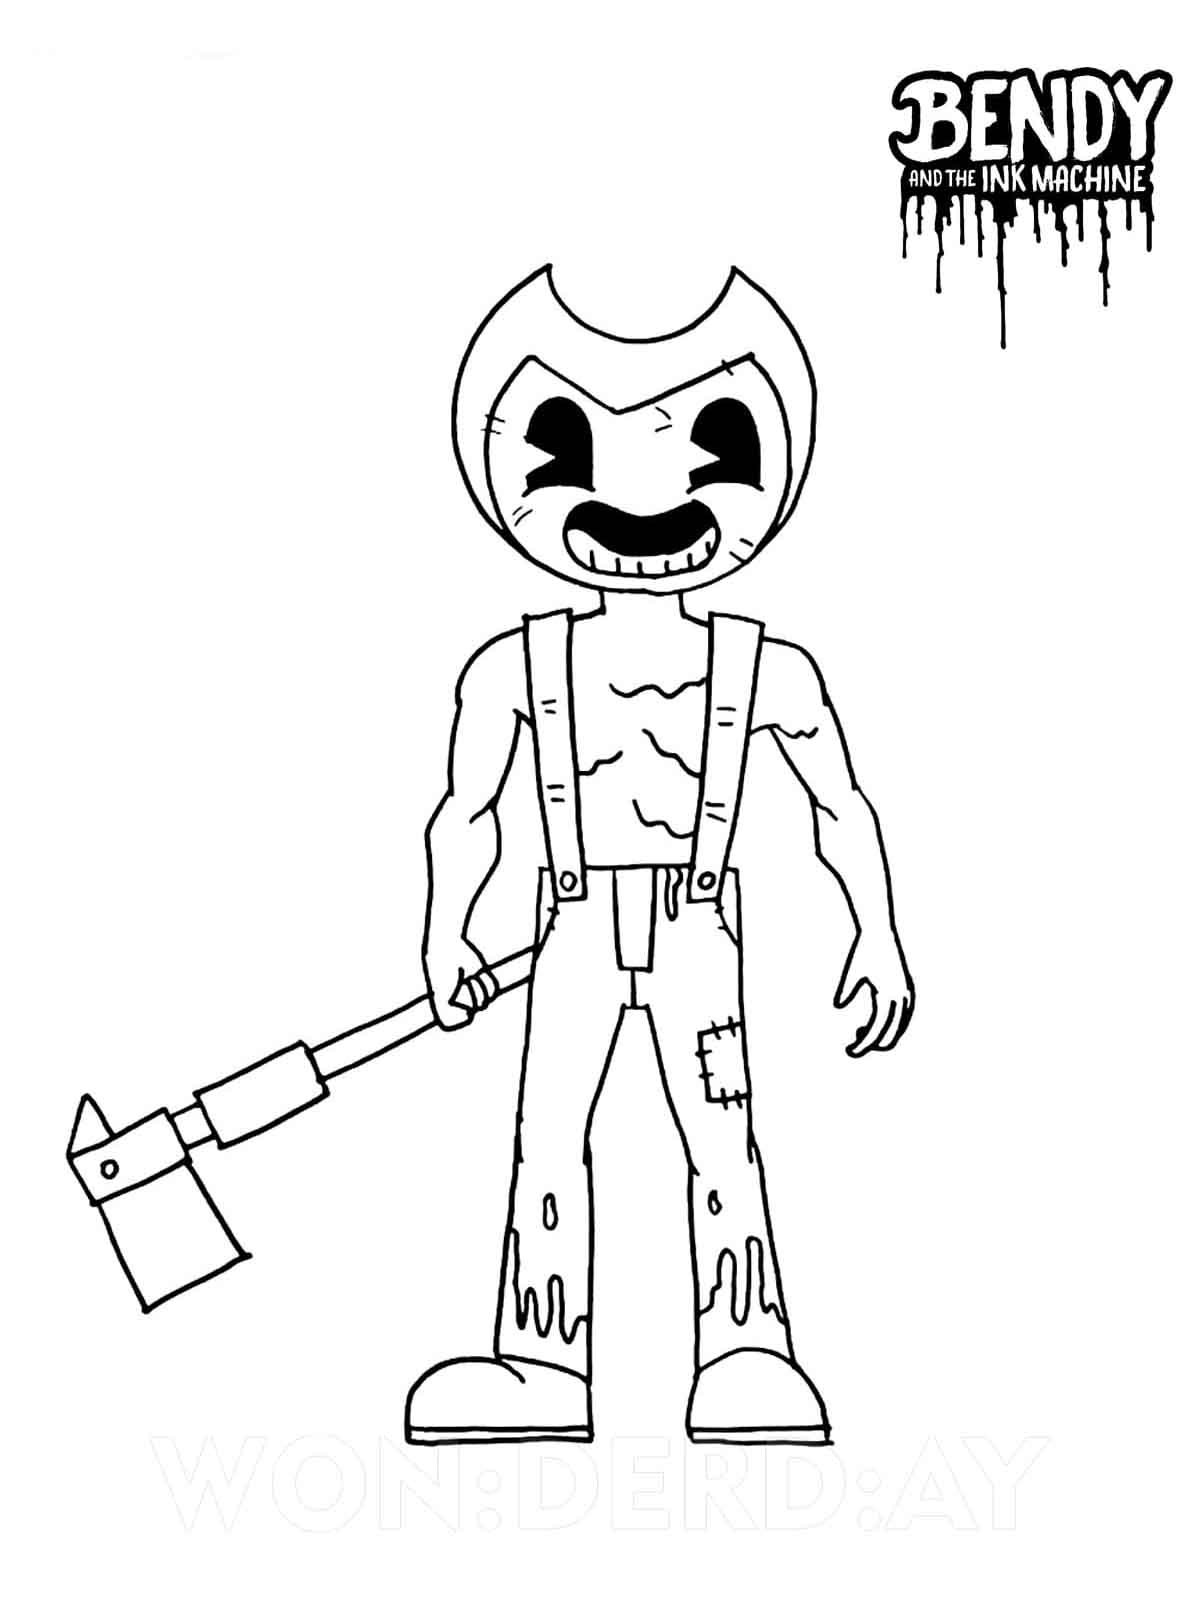 Bendy and the ink machine coloring pages